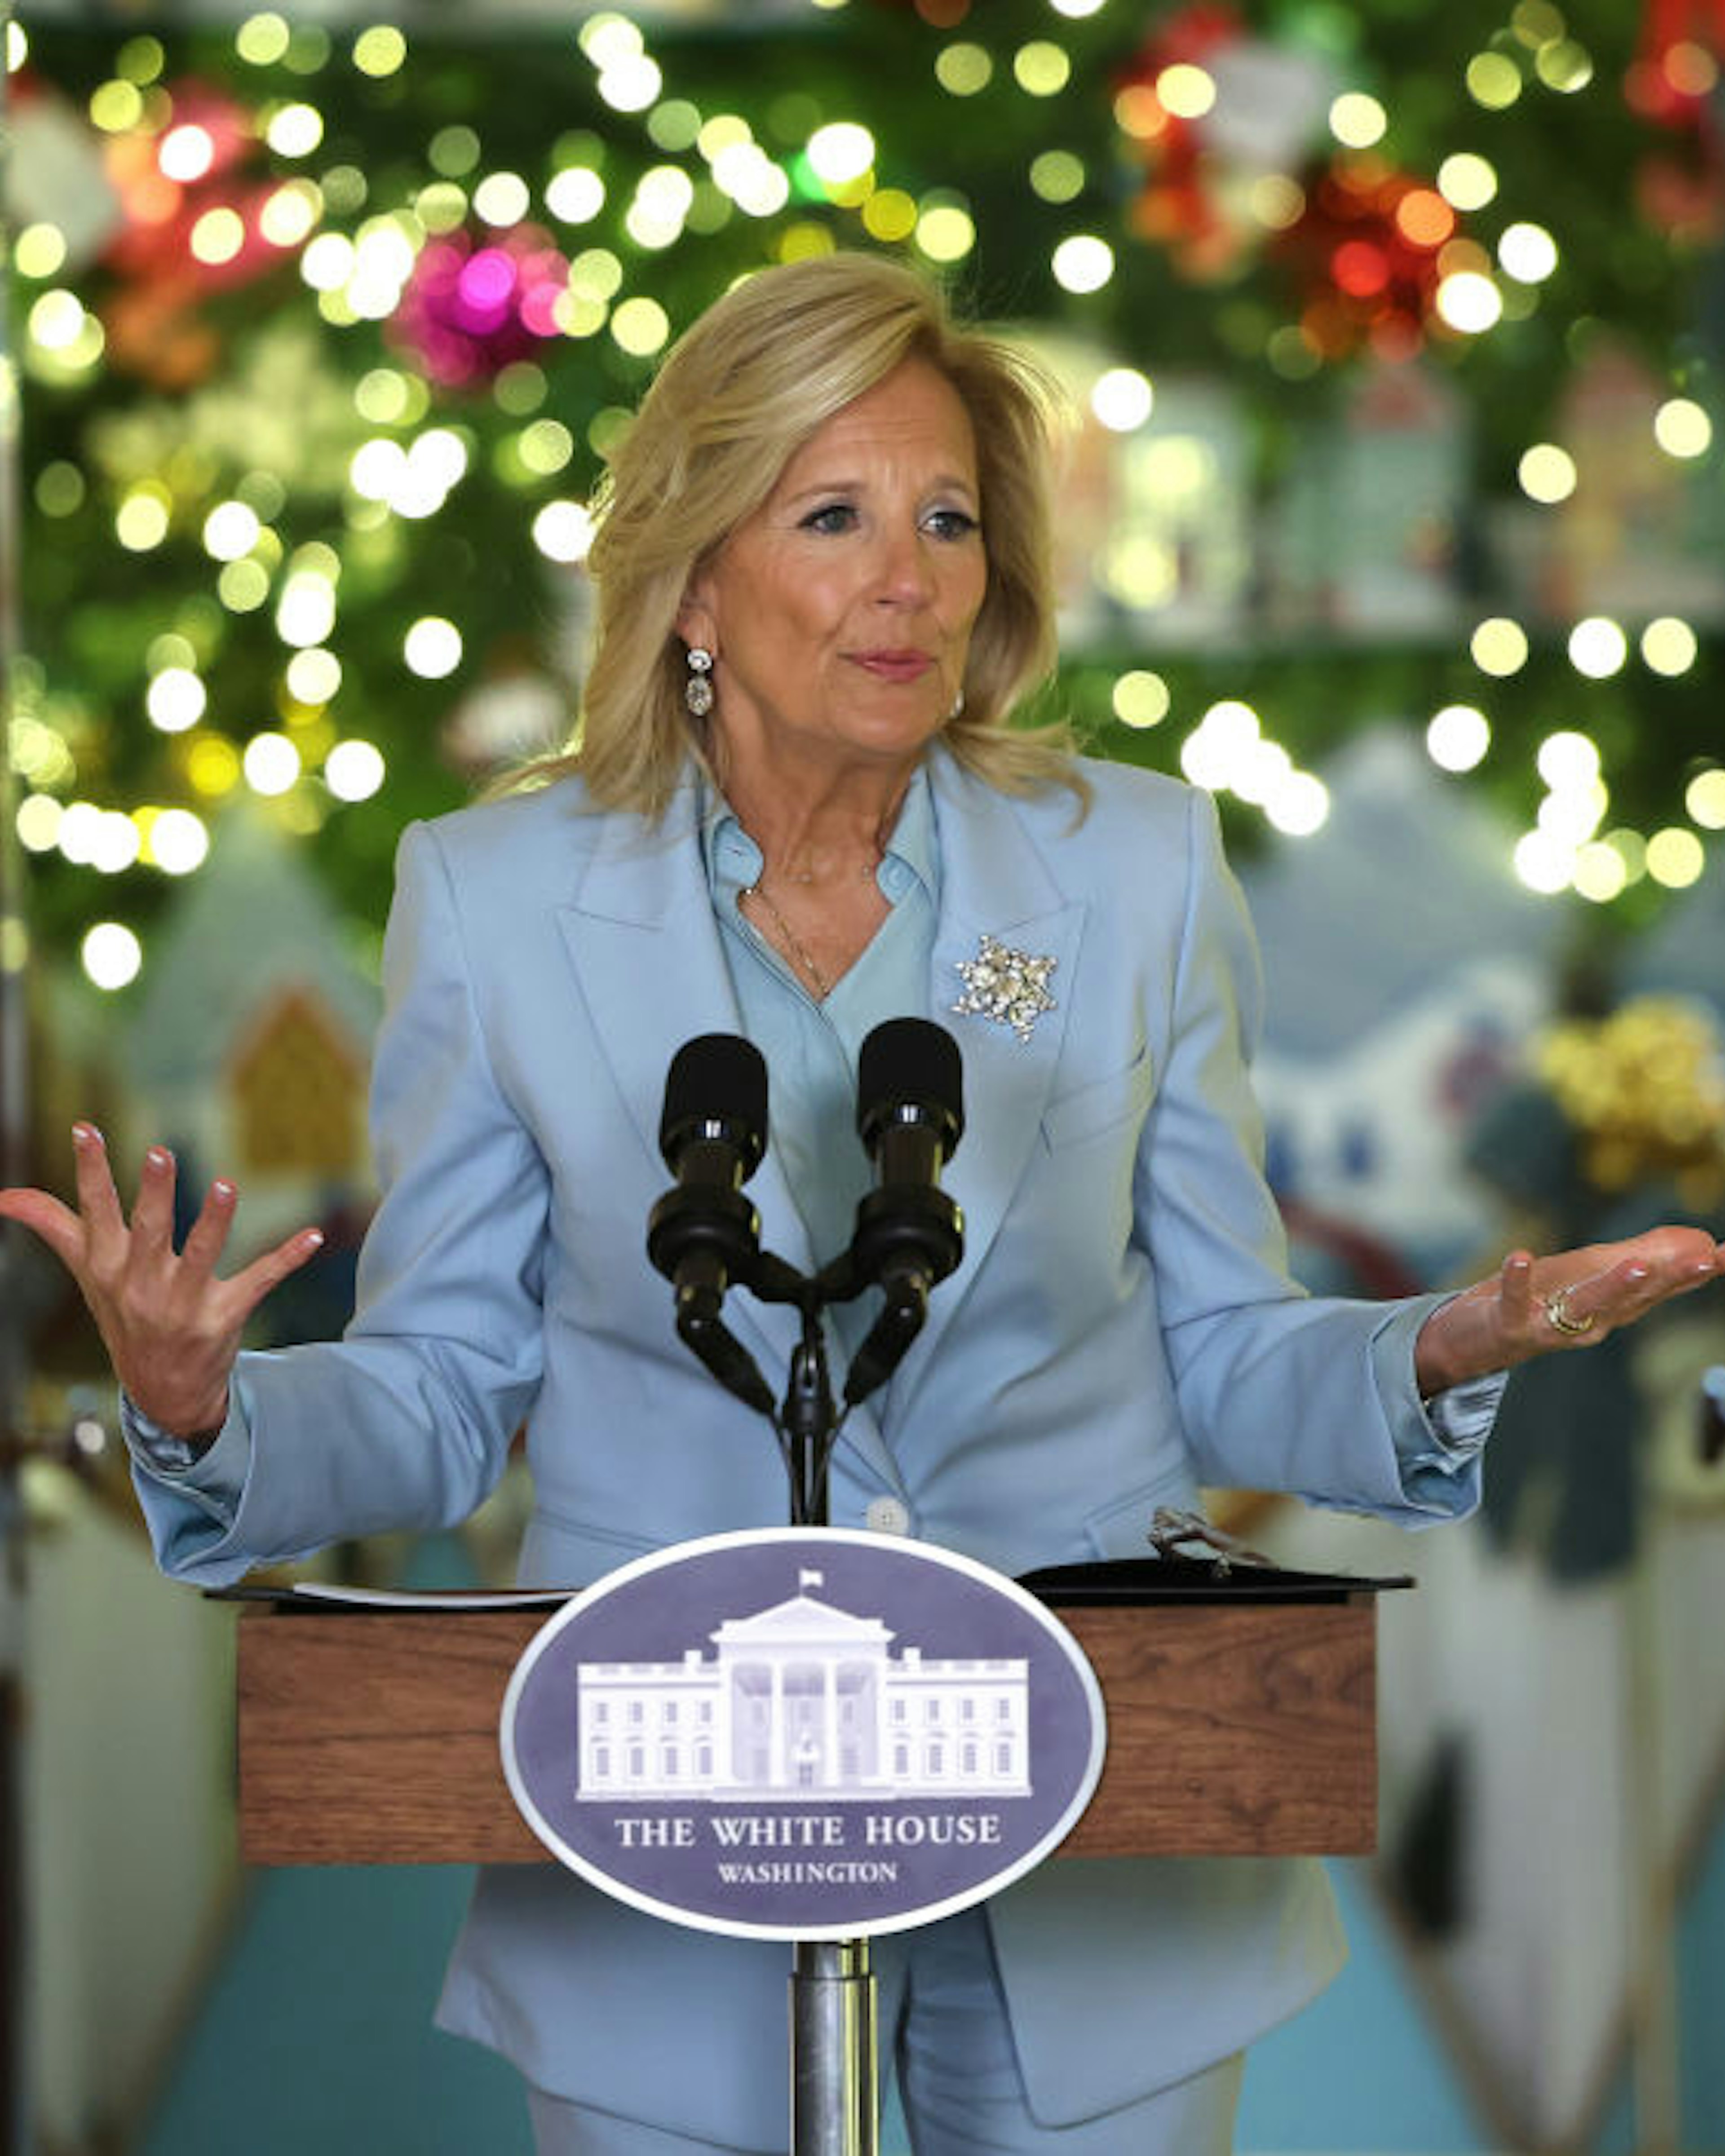 WASHINGTON, DC - NOVEMBER 27: First lady Jill Biden speaks about the holiday season and unveils the White House holiday decor while thanking volunteers who helped set it up, at the White House on November 27, 2023 in Washington, DC. The theme for this year's White House decorations is “Magic, Wonder and Joy,” and is designed to capture the “delight and imagination of childhood.” The White House expects to welcome approximately 100,000 visitors during the holiday season. (Photo by Kevin Dietsch/Getty Images)